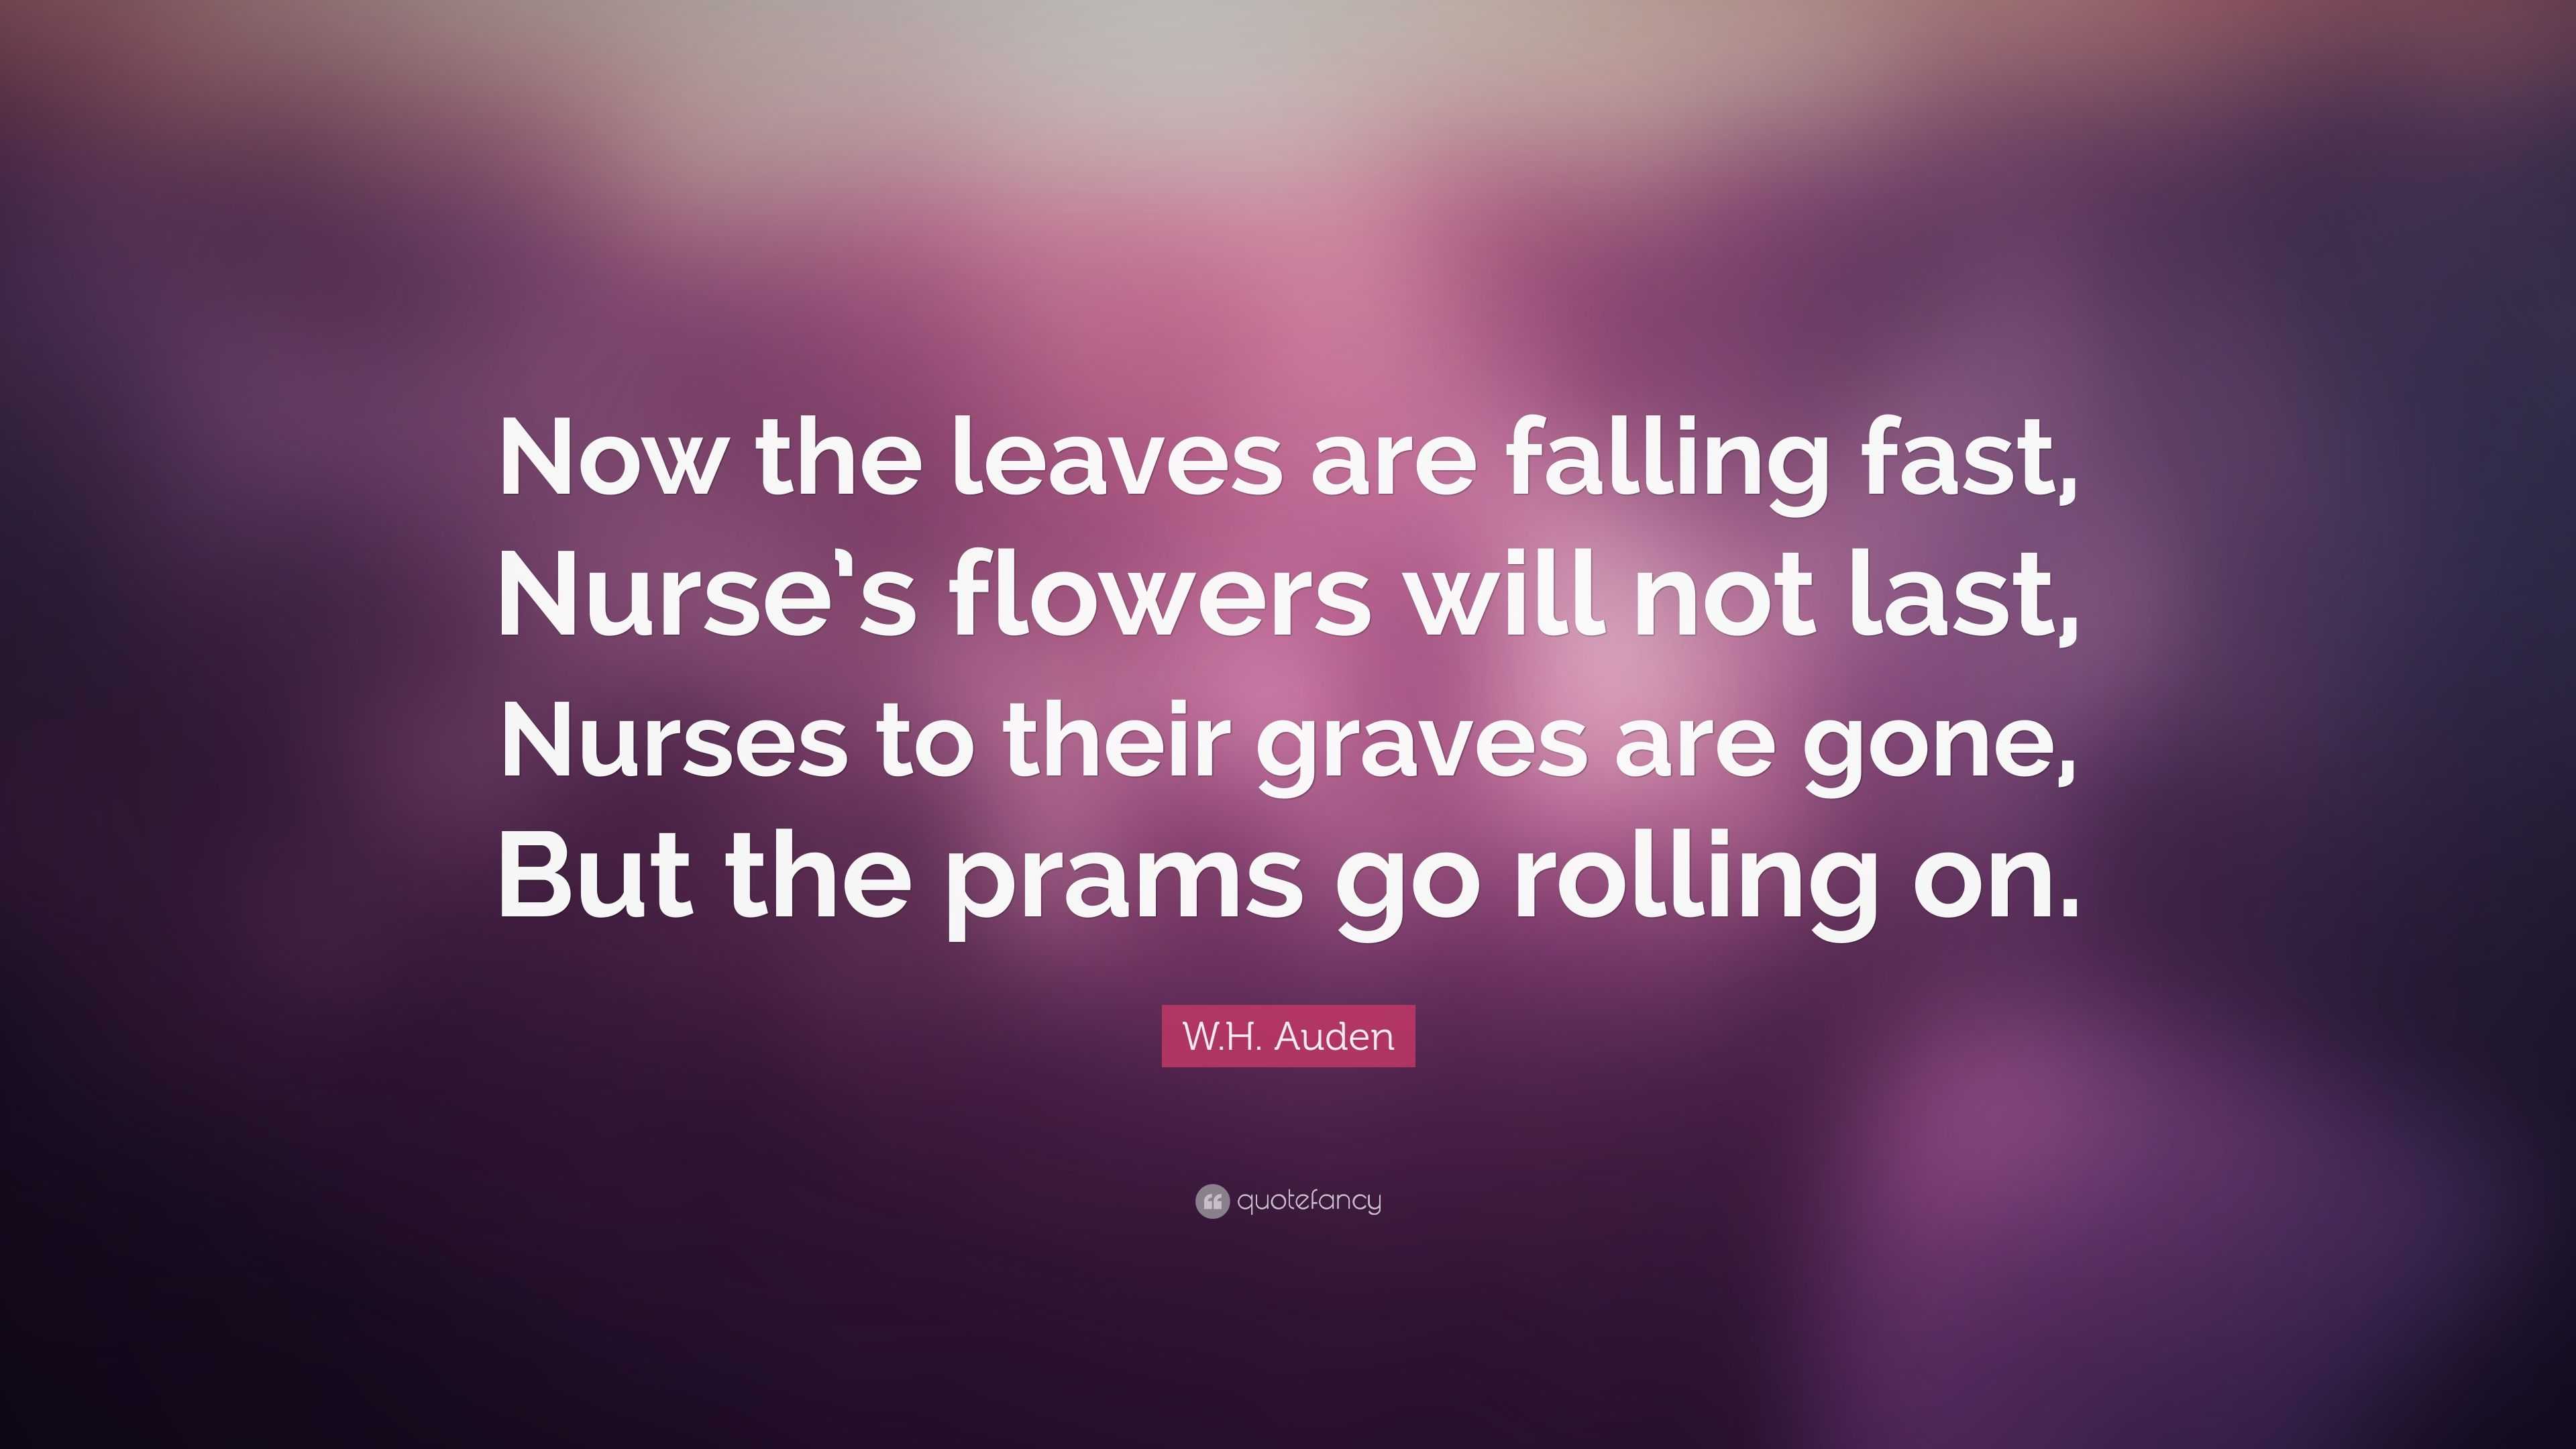 W.H. Auden Quote: “Now the leaves are falling fast, Nurse's